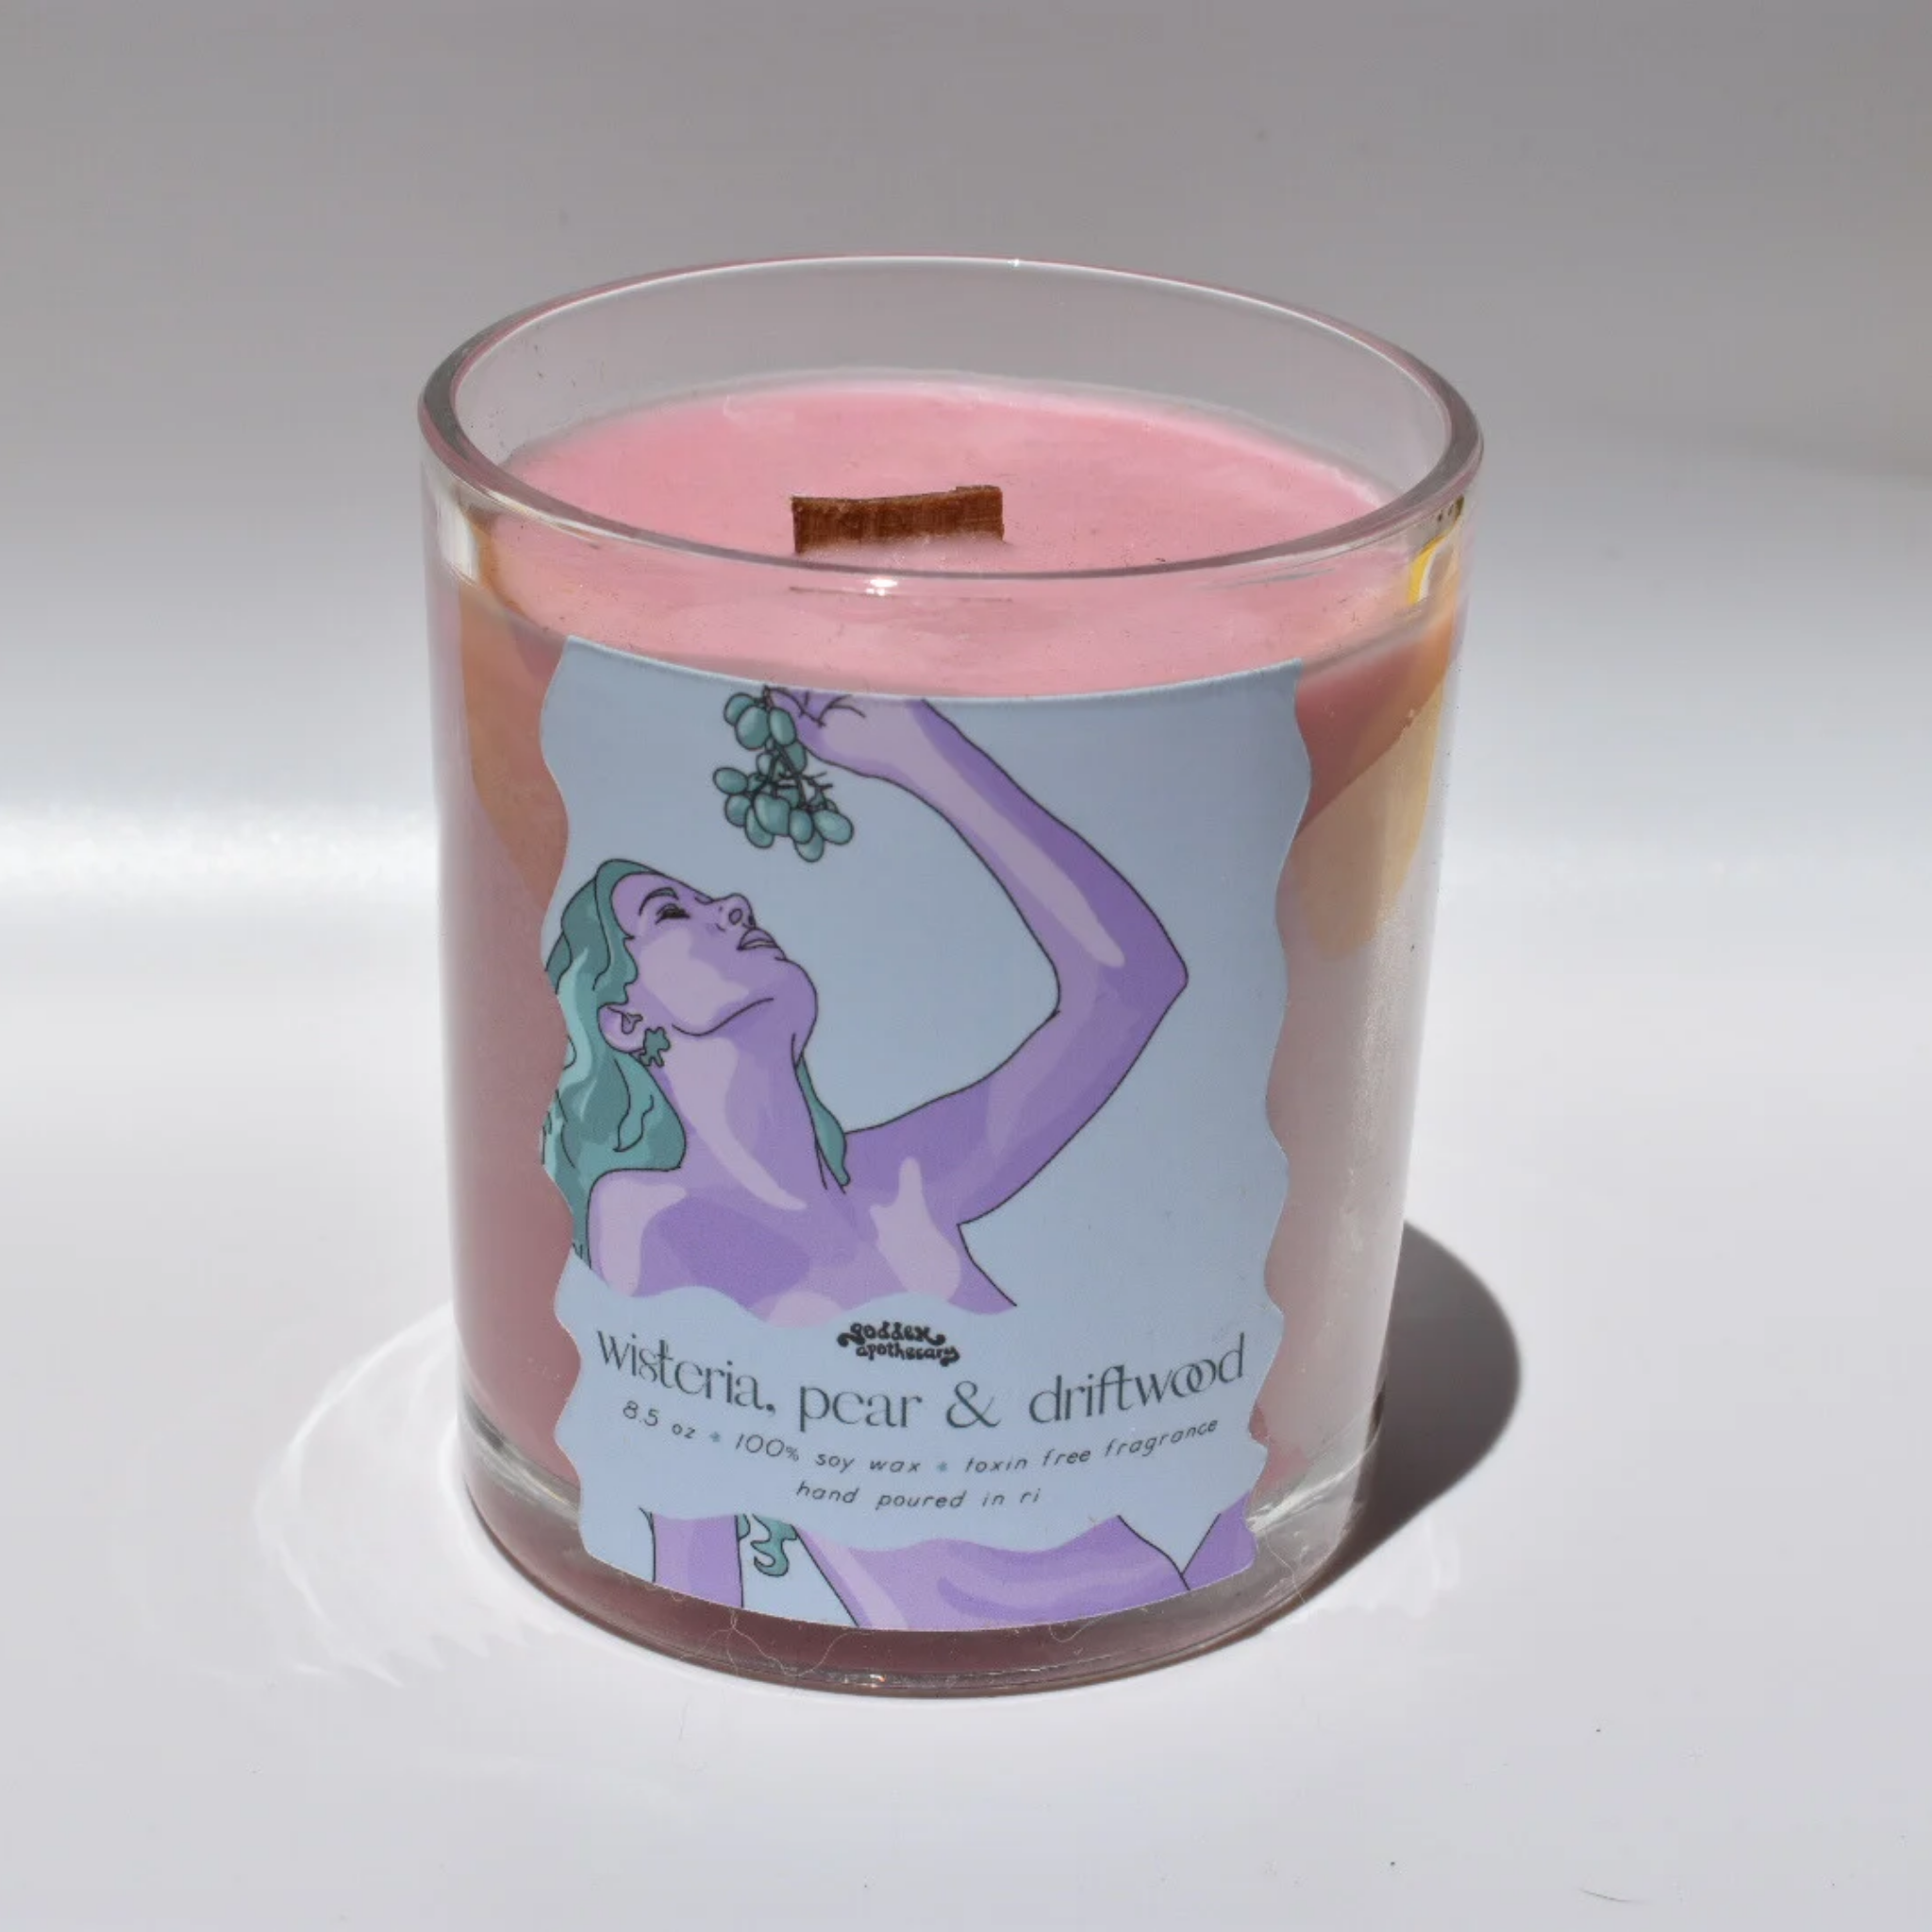 Hedonist: Wisteria Driftwood Scented Candle